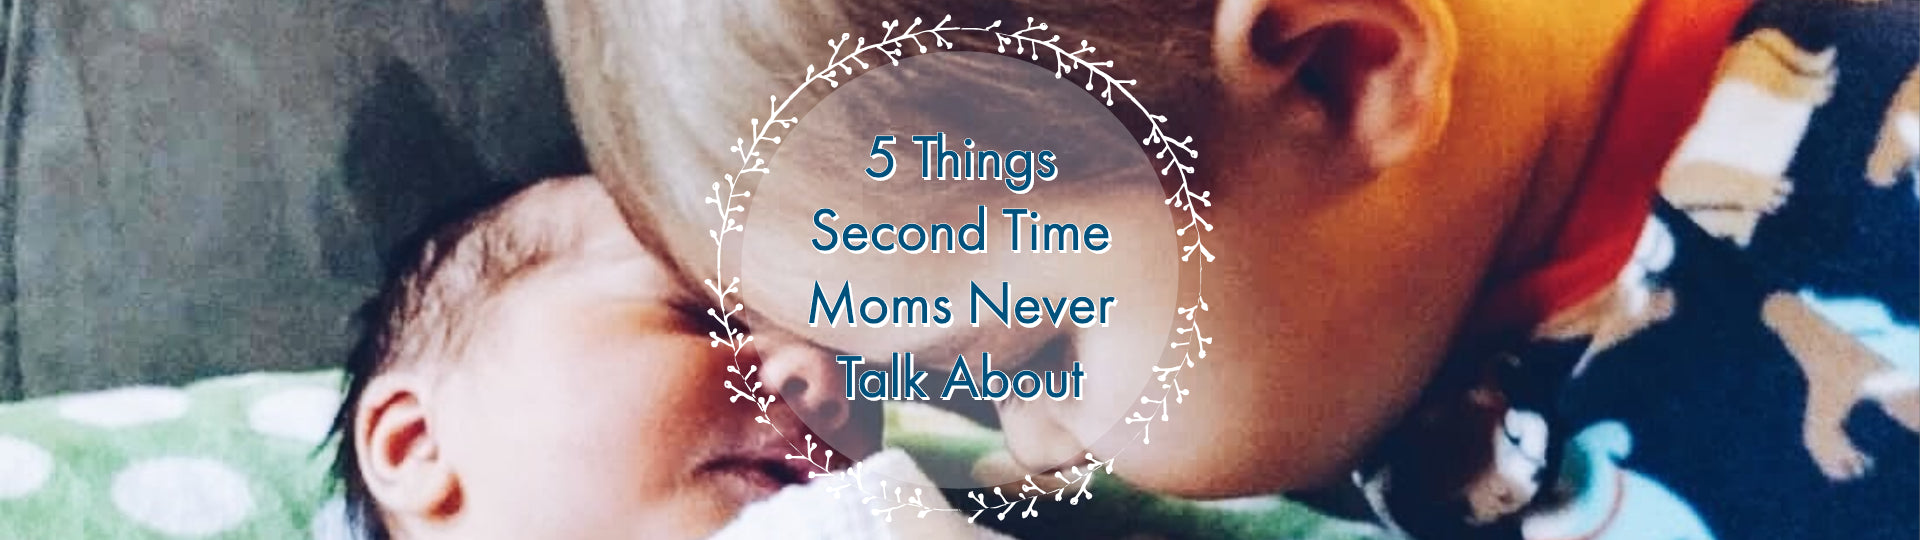 Things Second-Time Moms Never Talk About